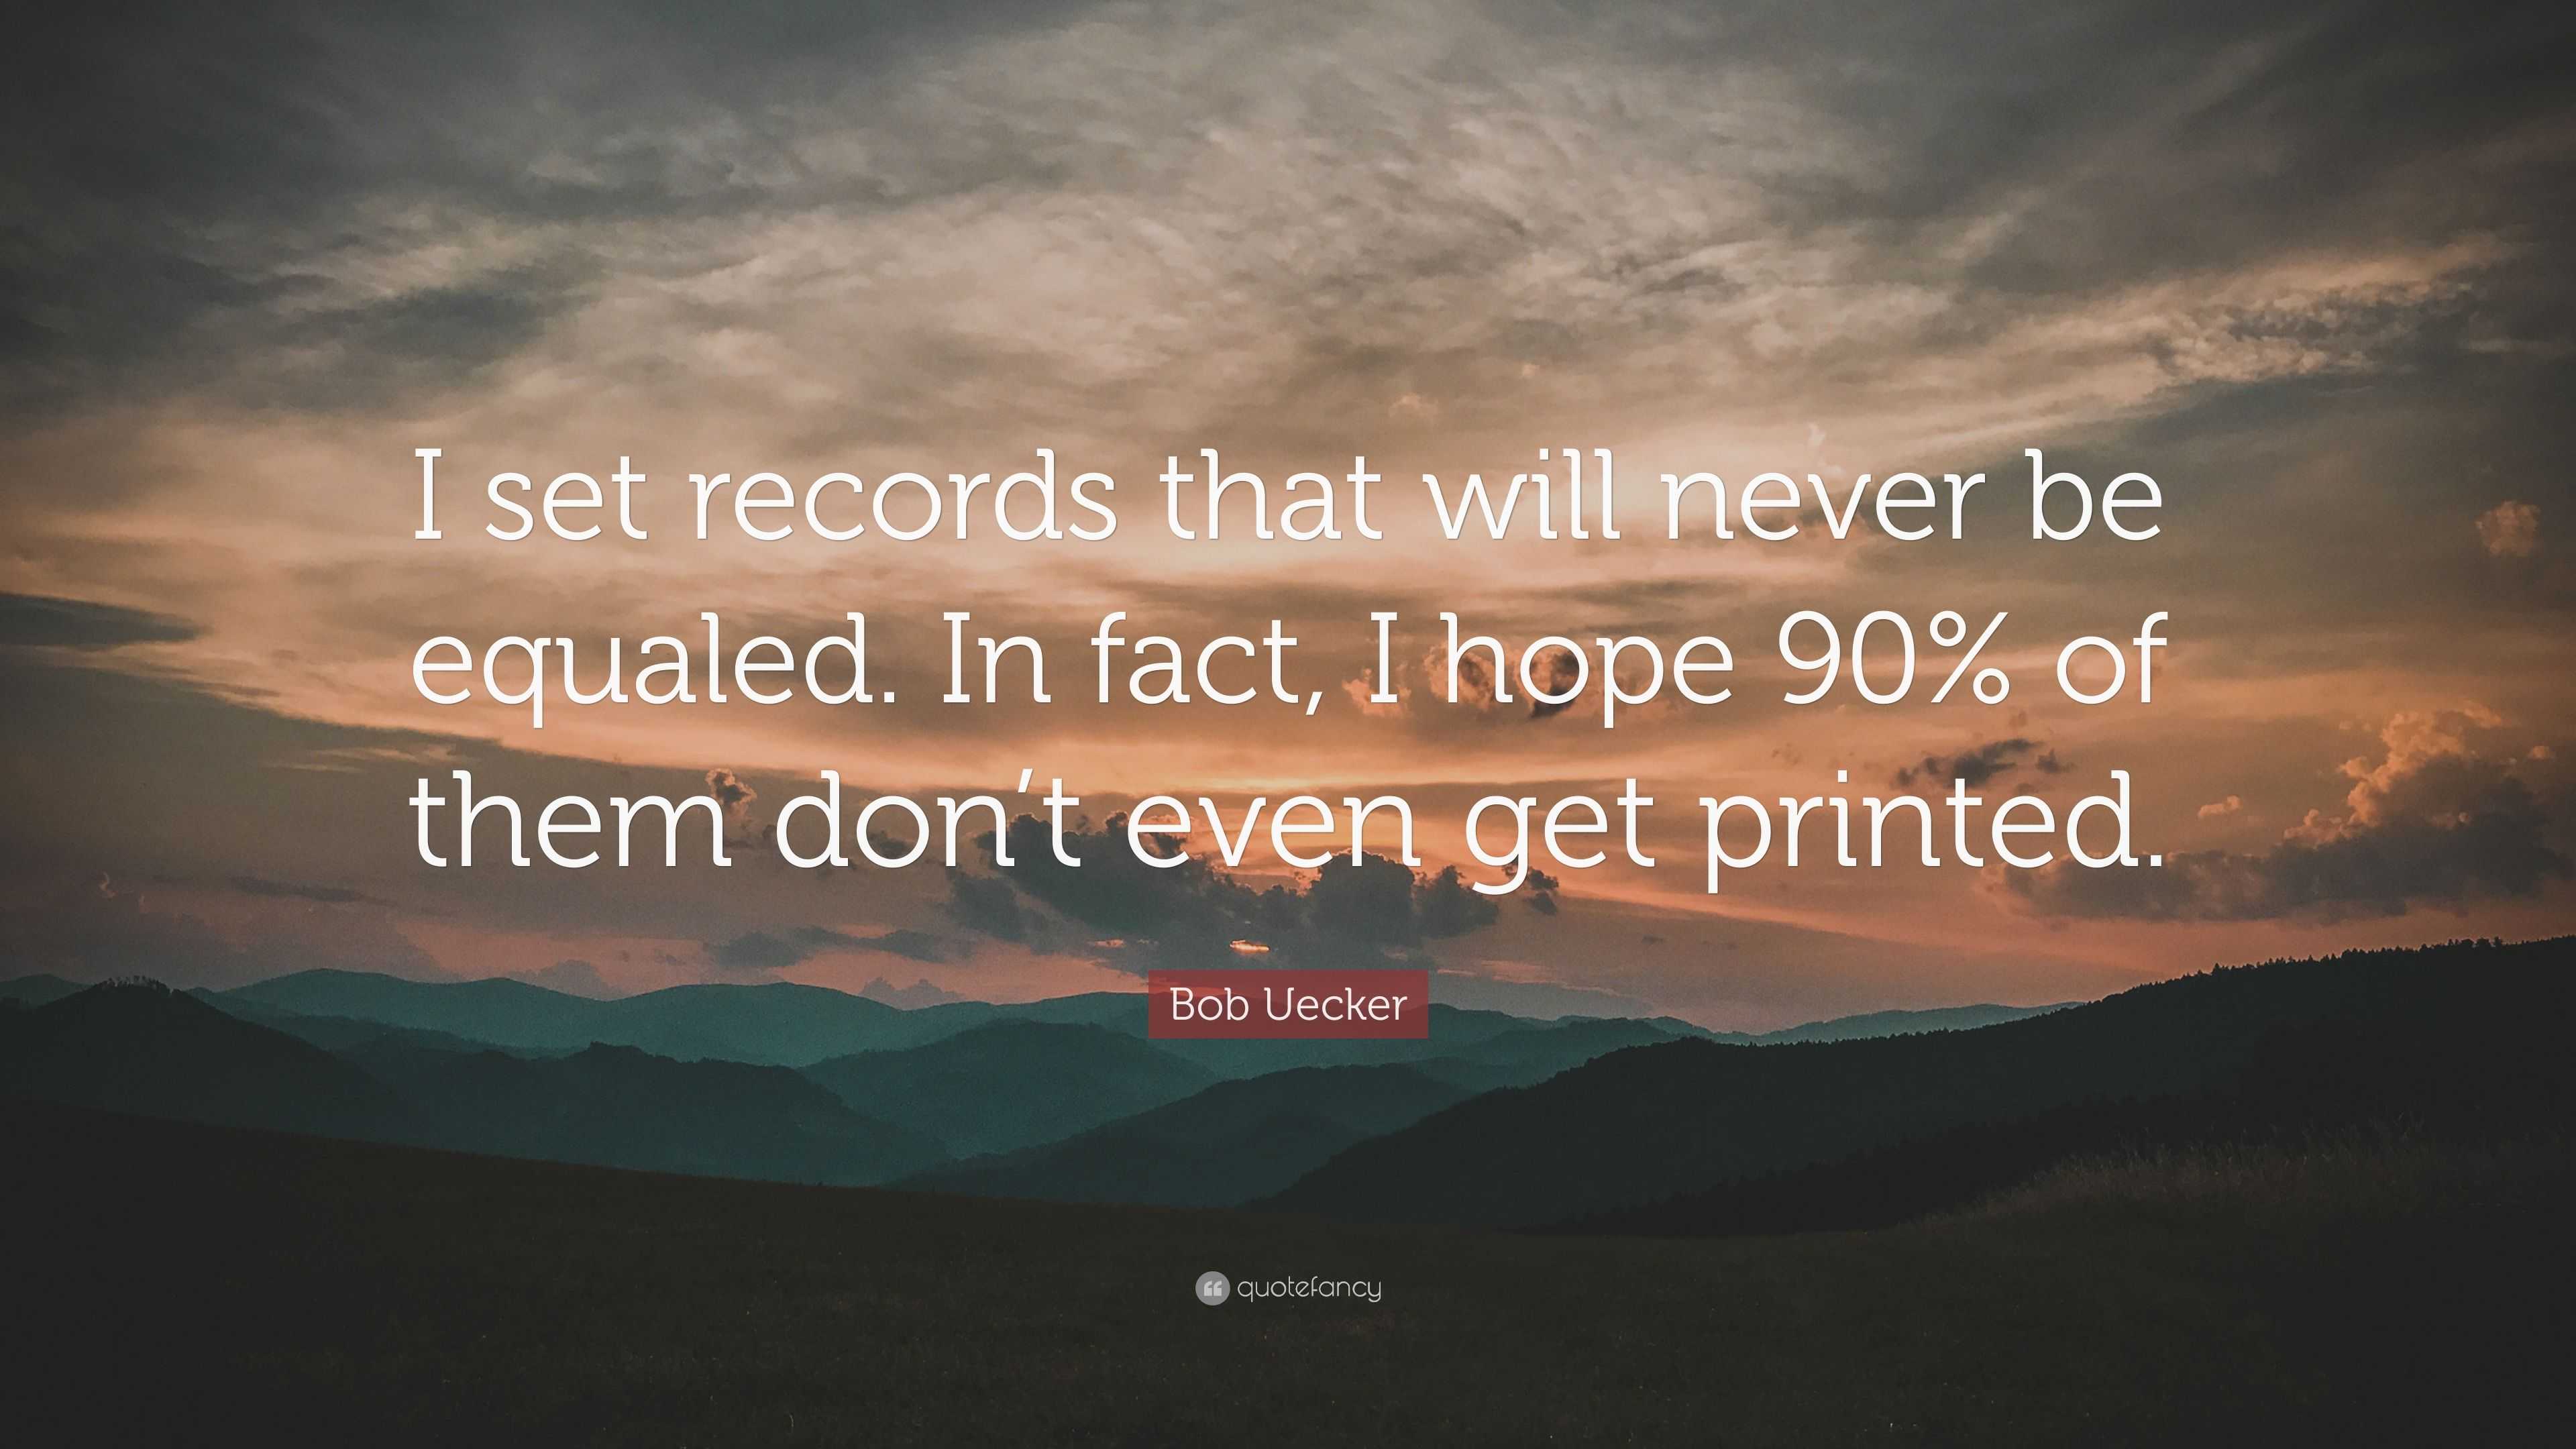 Bob Uecker Quote: “I set records that will never be equaled. In fact, I  hope 90